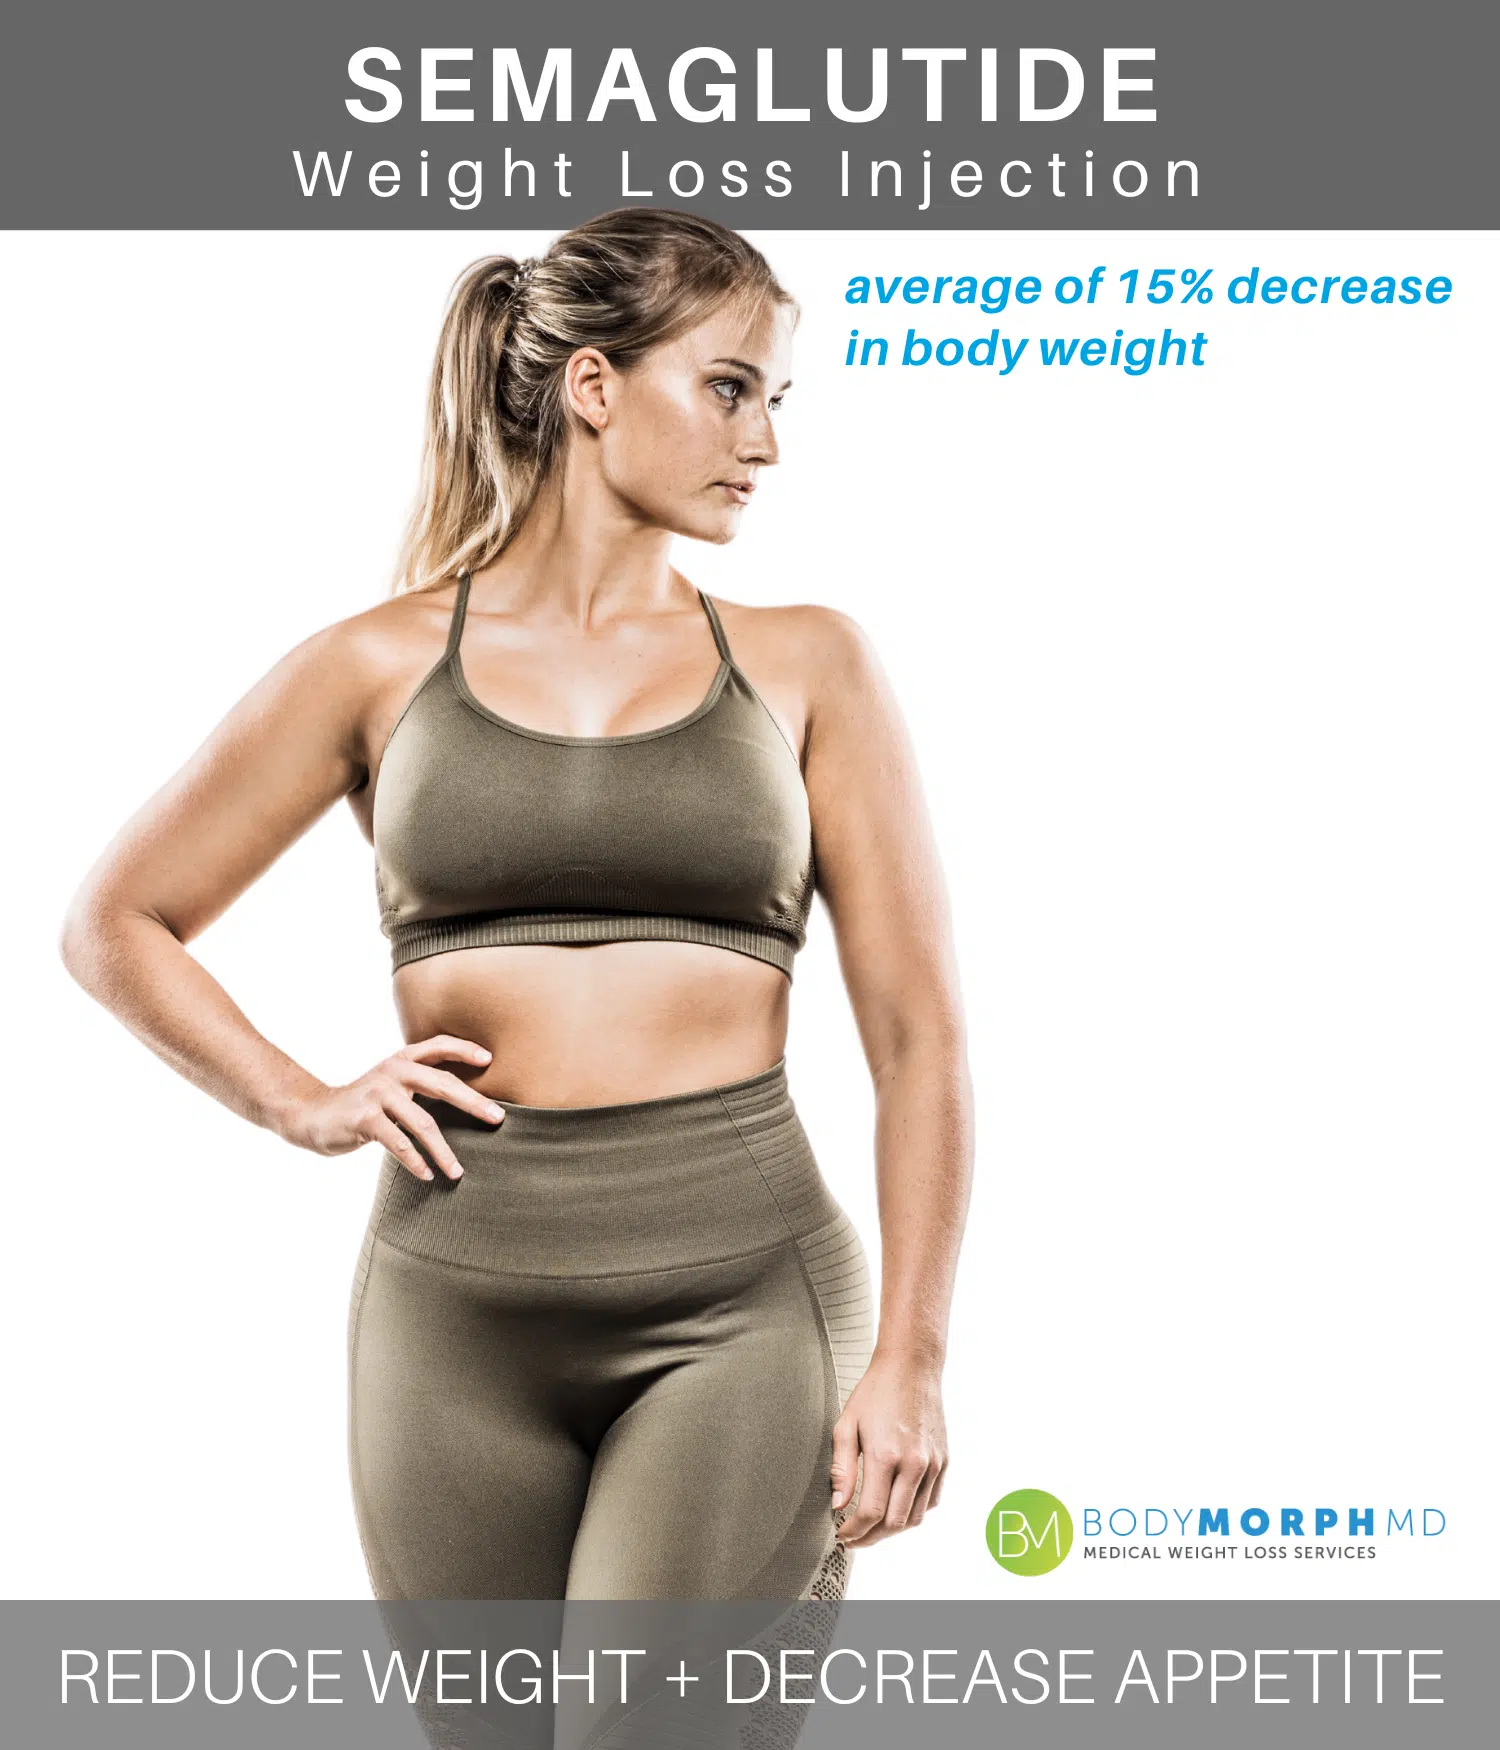 Gorgeous blonde woman with curves in sportswear promoting Semaglutide weight loss injection-a service treatment offered at BodyMorph MD.